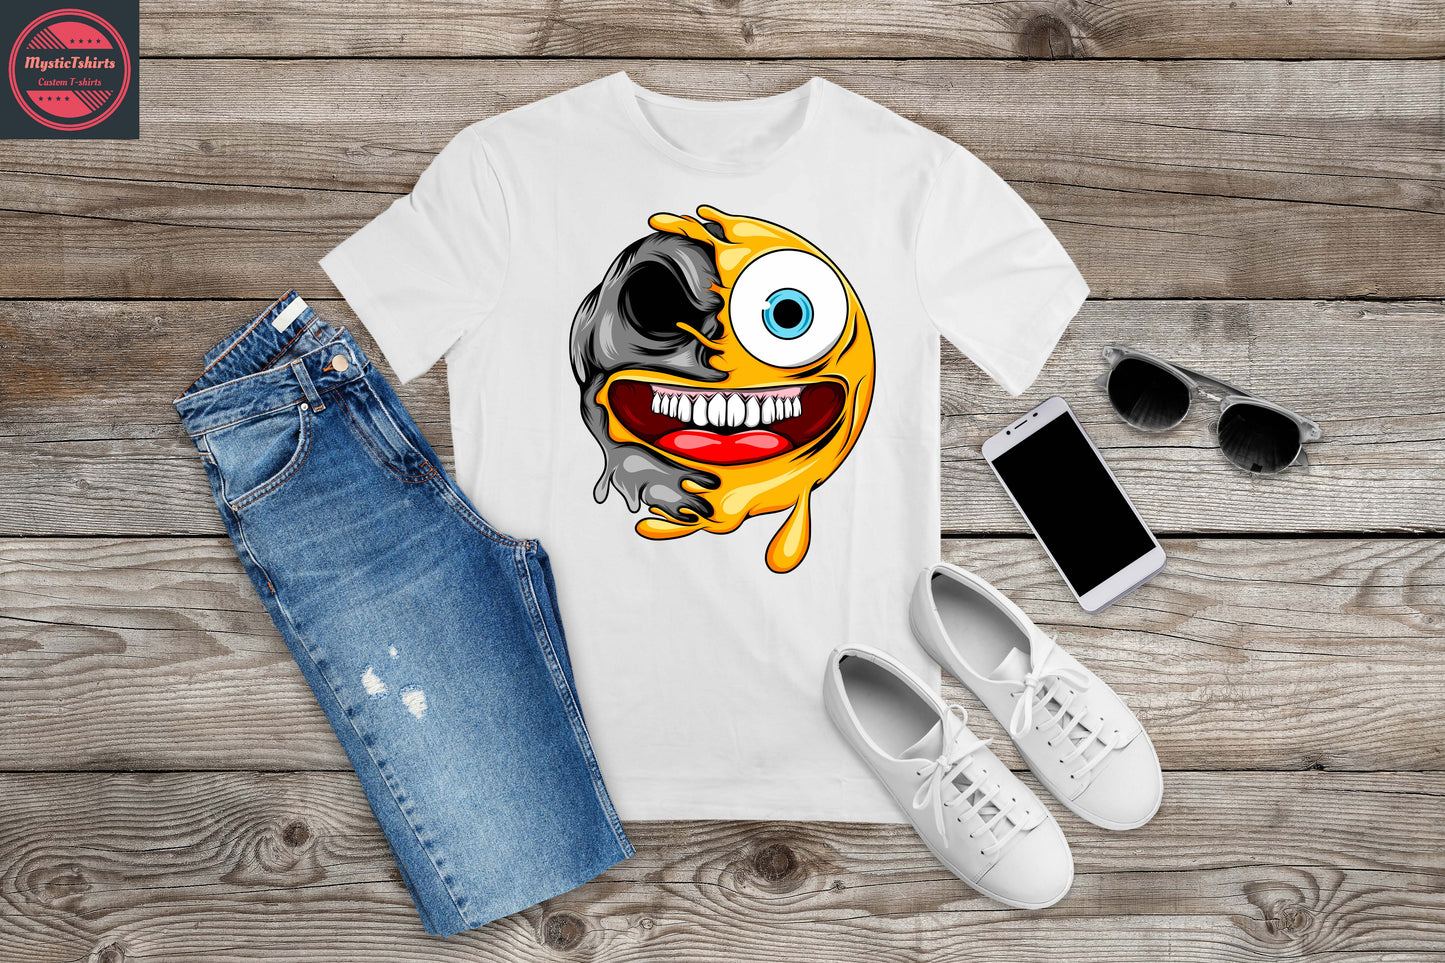 086. CRAZY FACE, Personalized T-Shirt, Custom Text, Make Your Own Shirt, Custom Tee